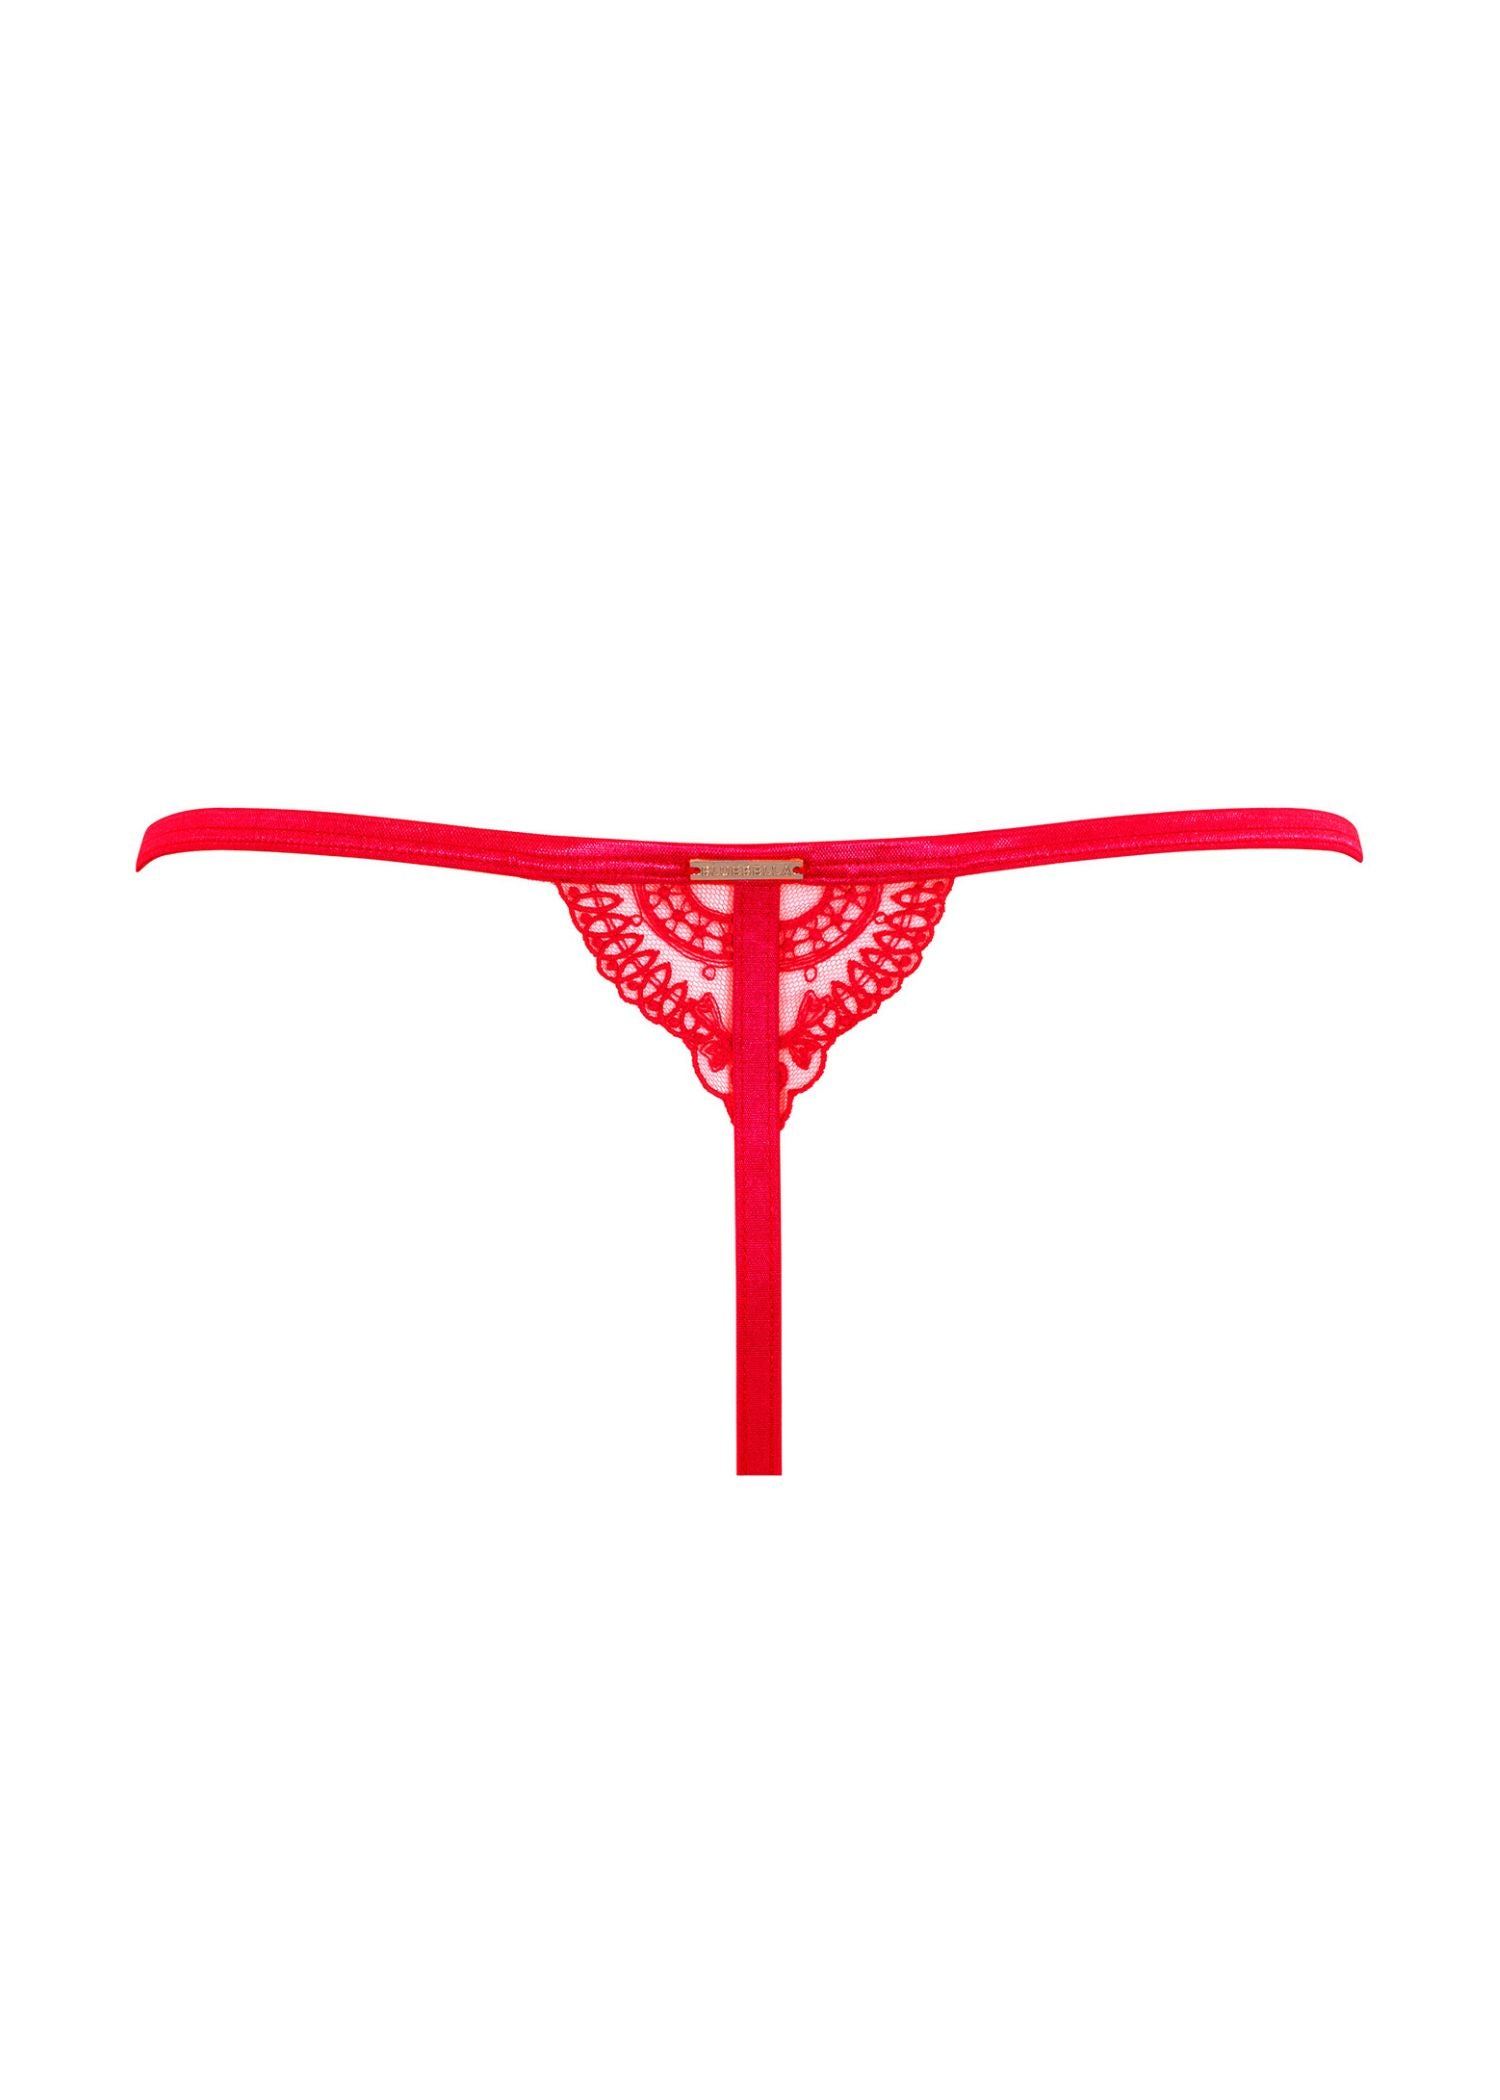 Bluebella Marseille Thong (Tomato Red) - Superfine Embroidery Lace | Avec Amour Luxury Lingerie